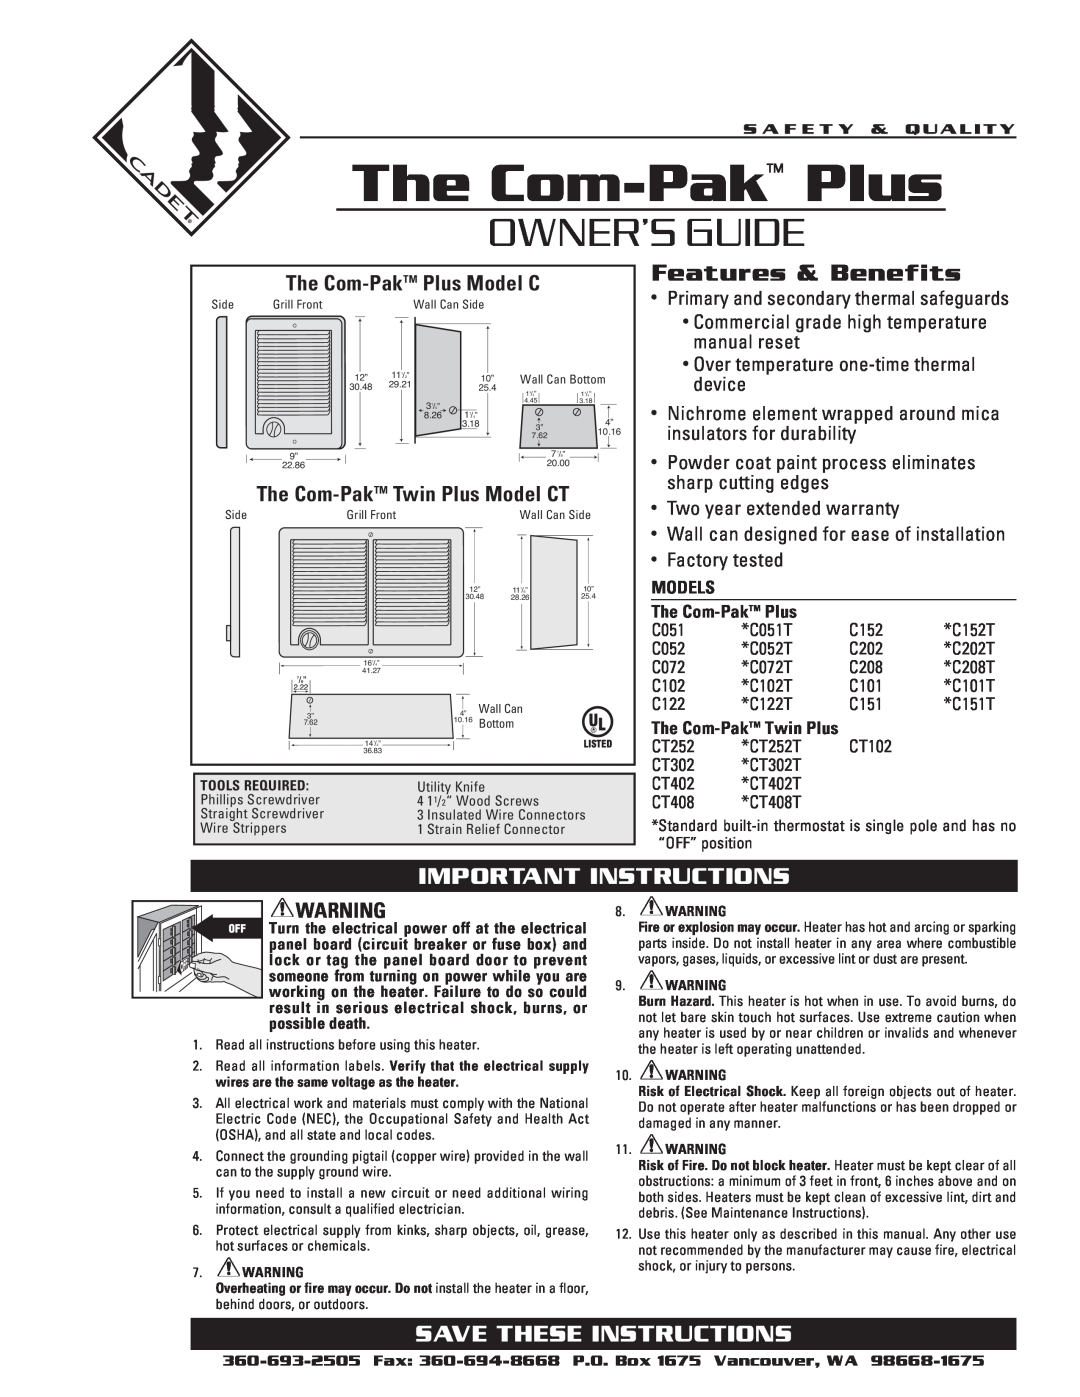 Cadet warranty The Com-Pak Plus, Owner’S Guide, Features & Benefits, Important Instructions, Save These Instructions 